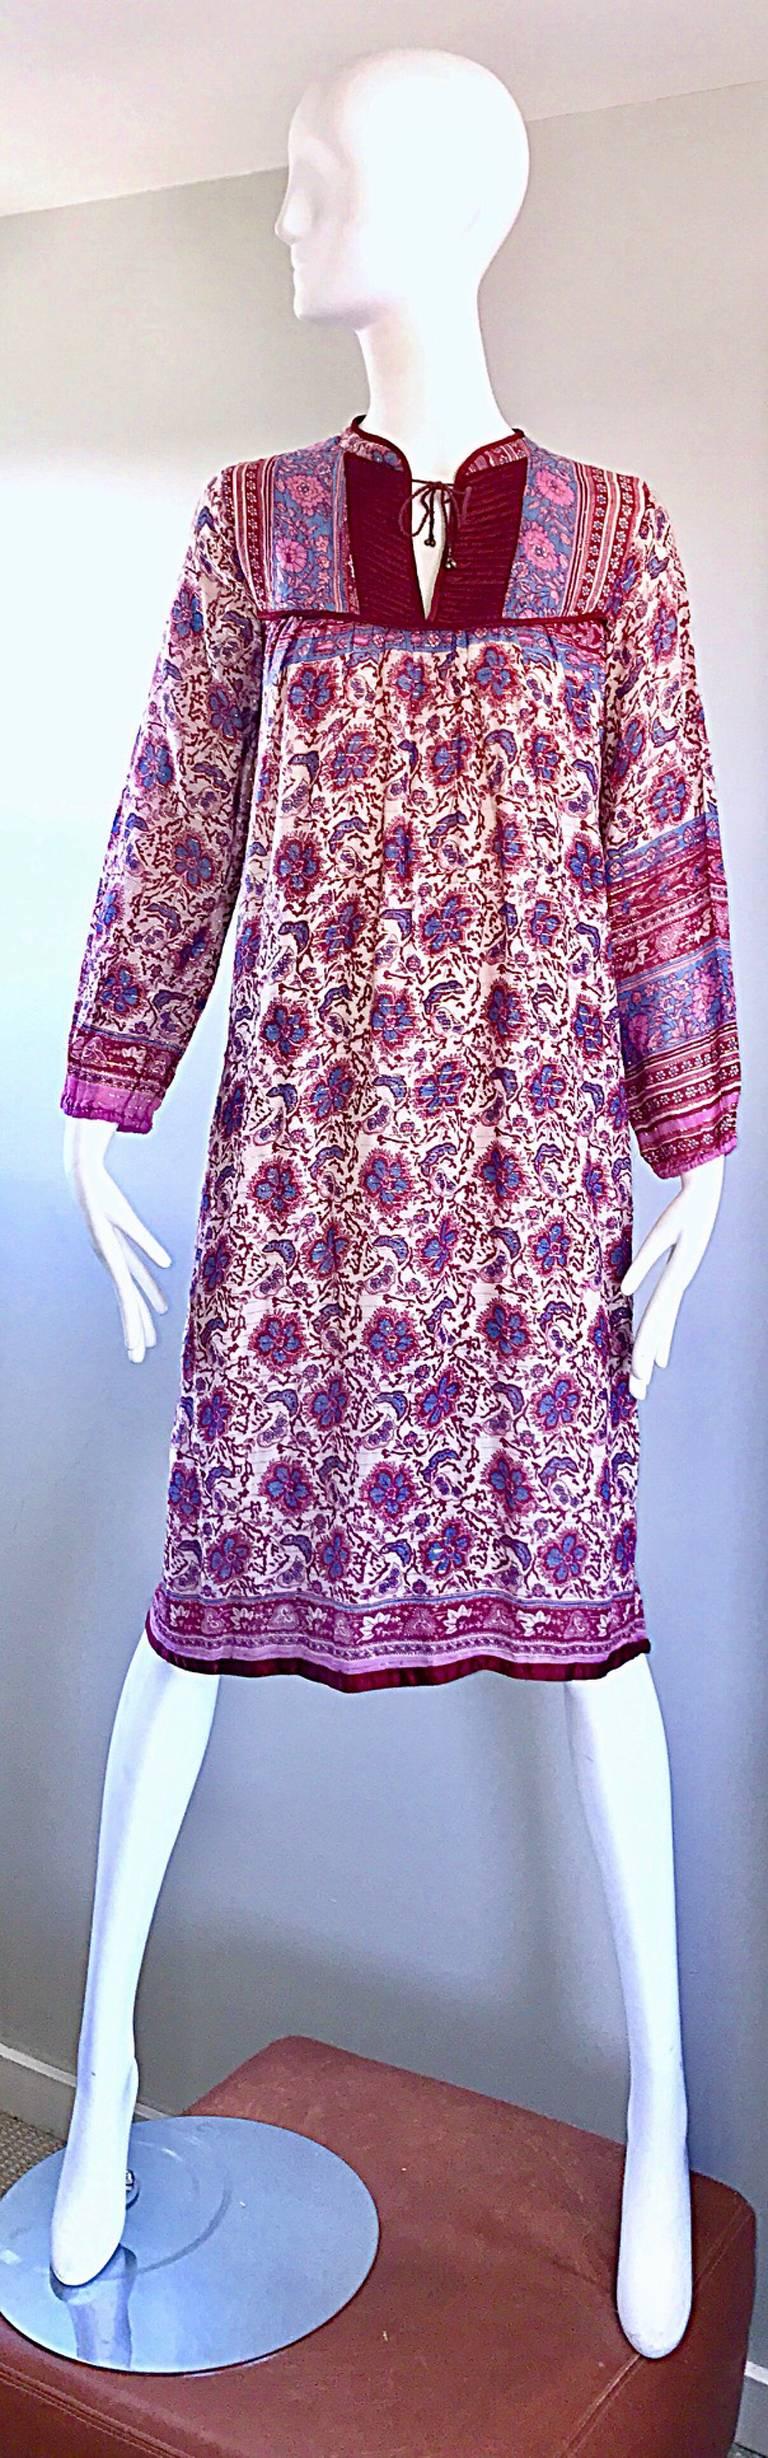 Chic 1970s Pink Purple Paisley and Flowers Ethnic Boho Hippie Vintage 70s Dress 1